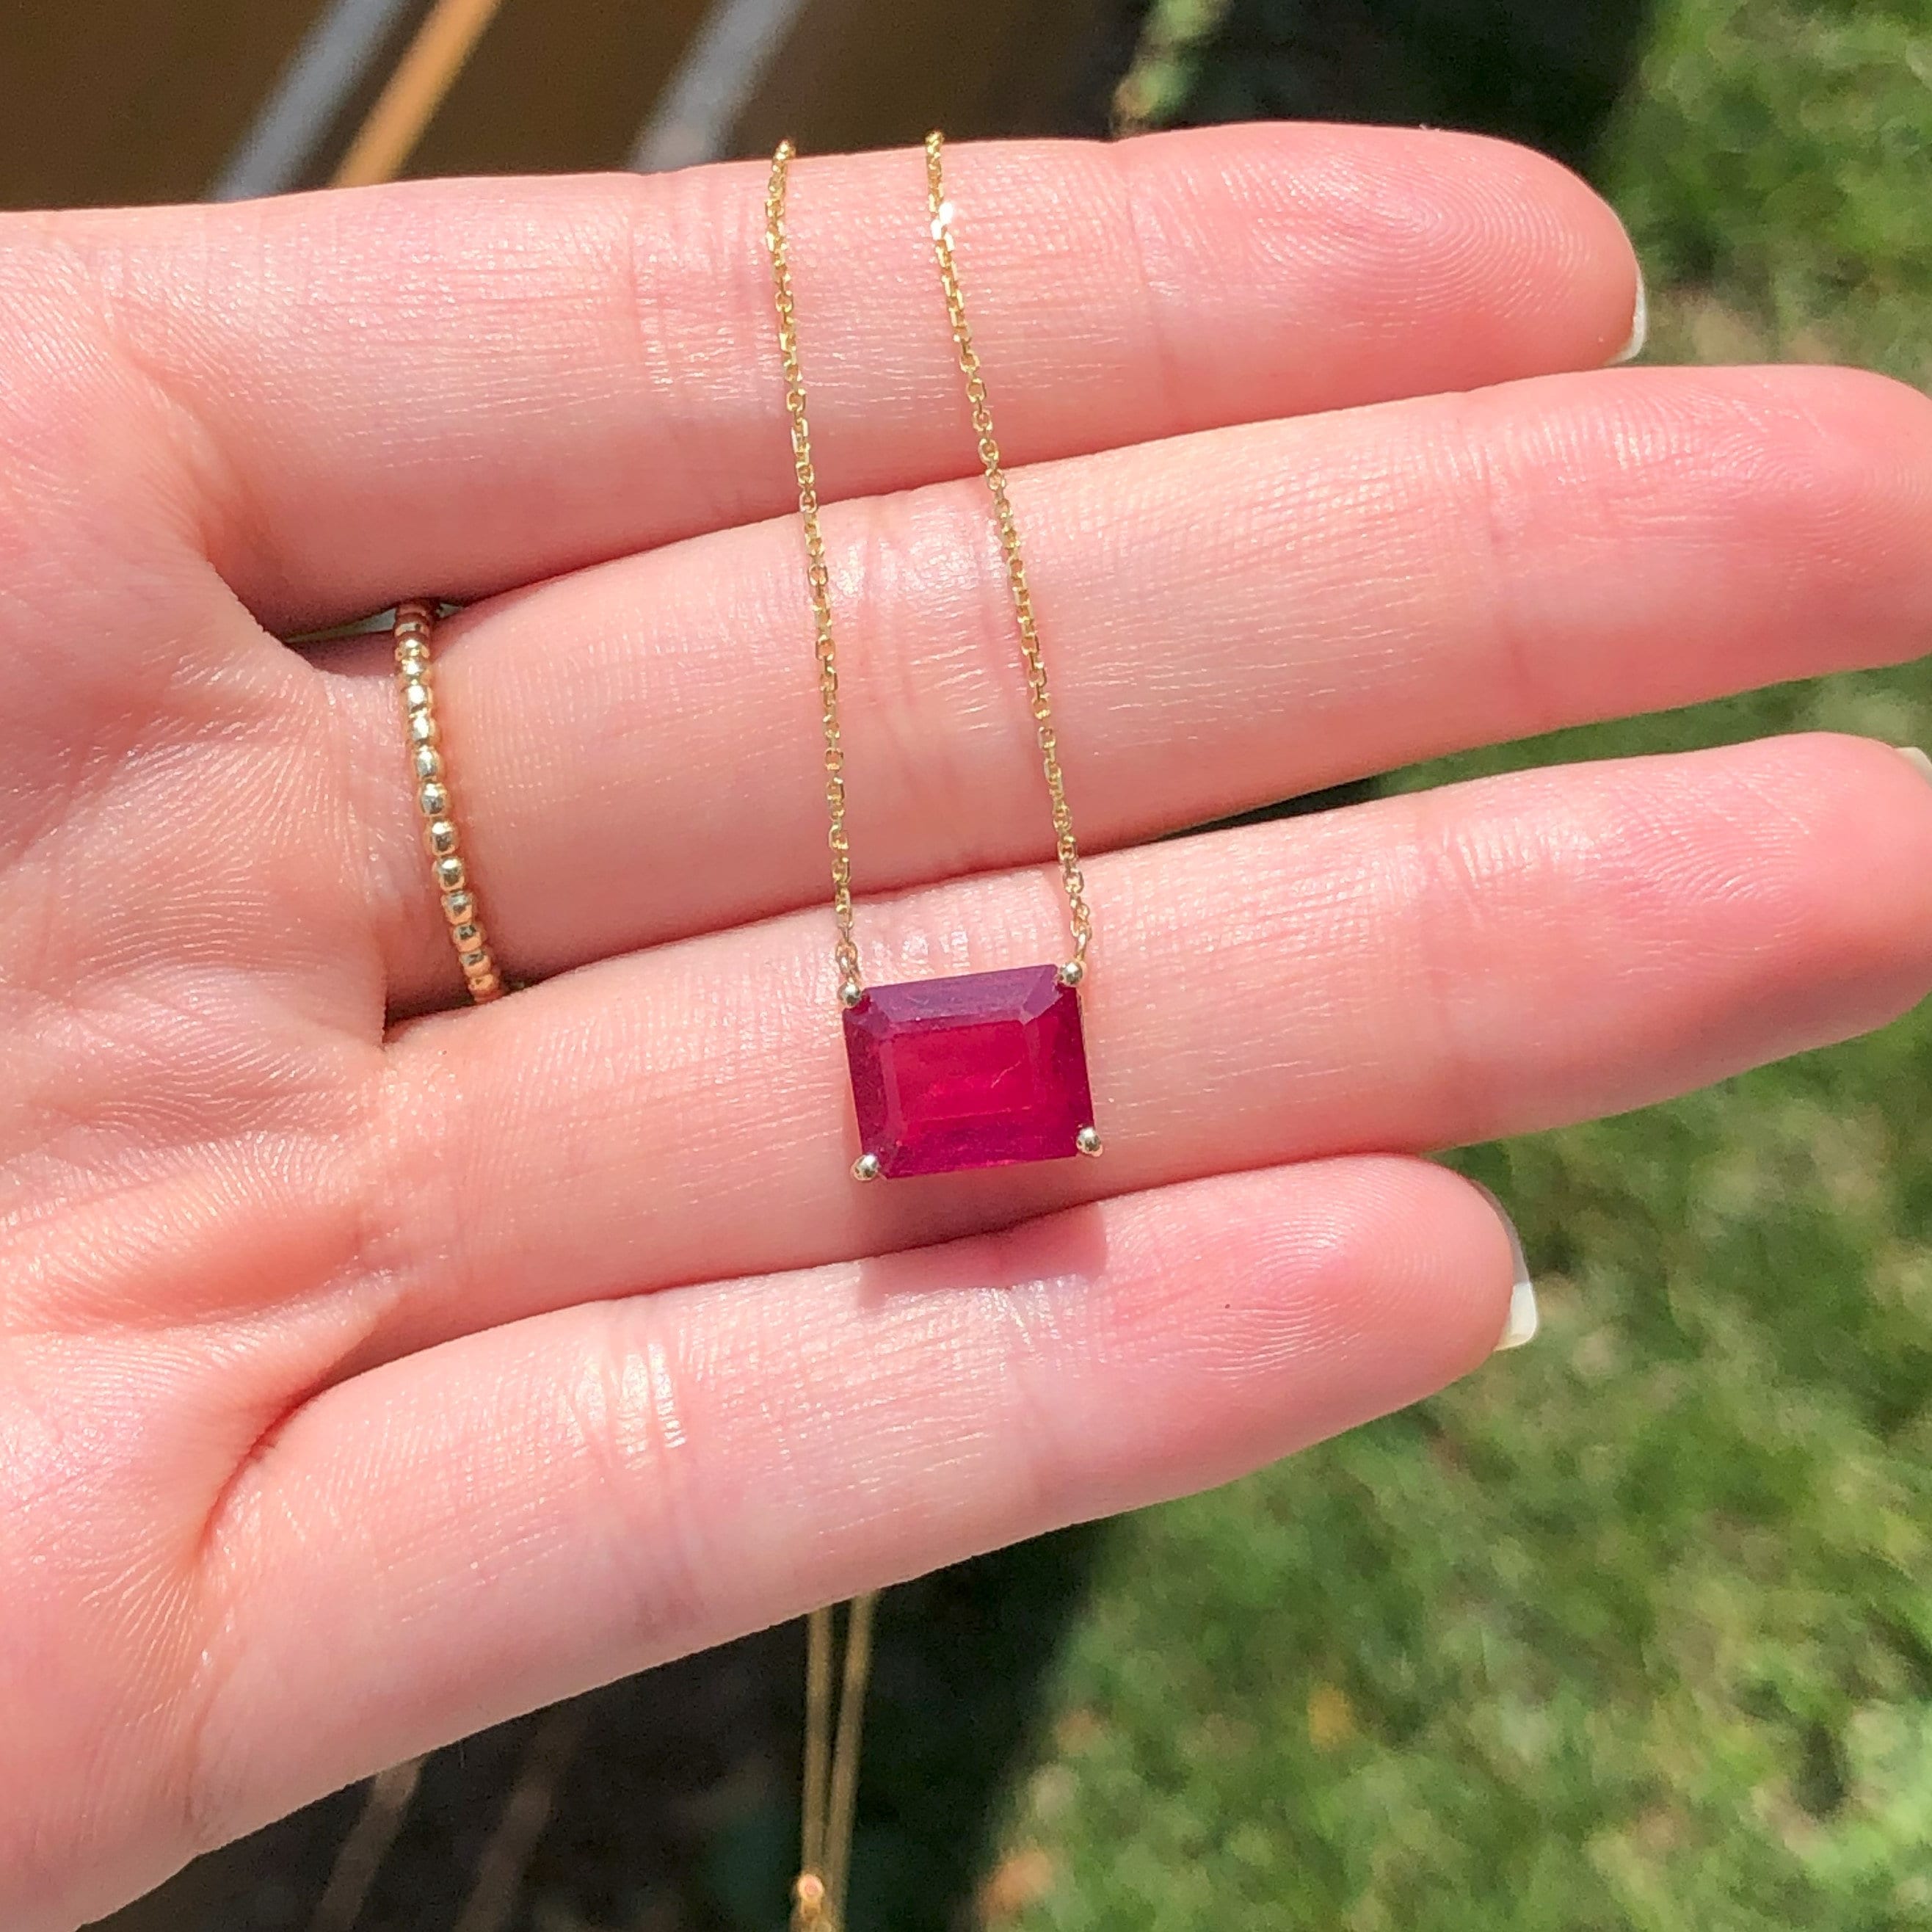 Solitaire Madagascar Ruby Pendant in Solid 14k White, Yellow or Rose Gold | Emerald Cut 9x7mm | East West | Red Gemstone | July Birthstone